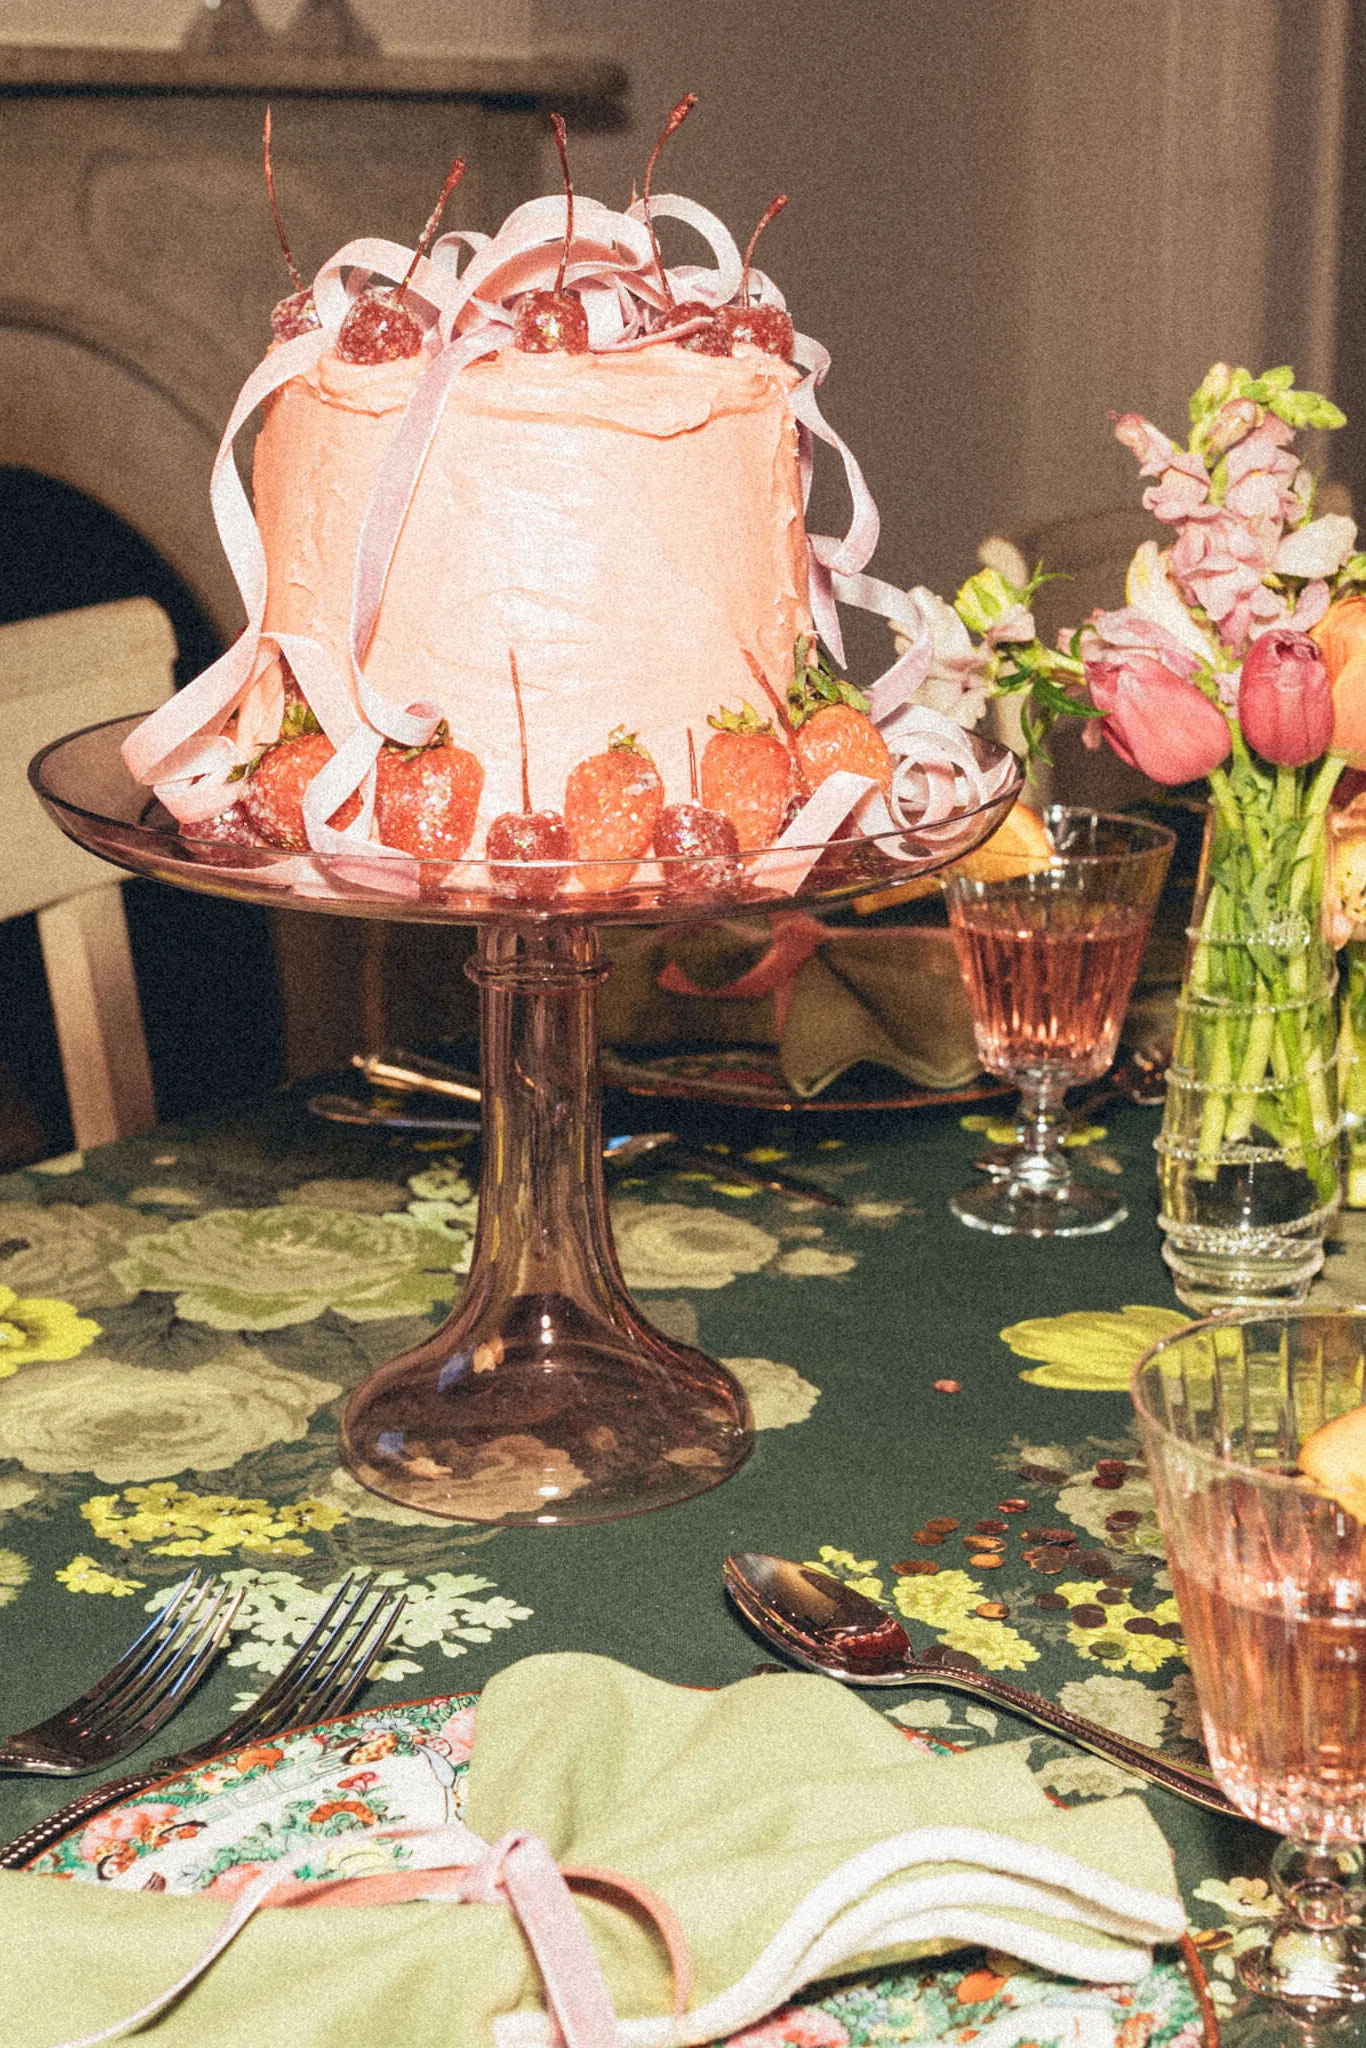 Estelle Colored Glass Cake Stands in Rose and Mint Green |